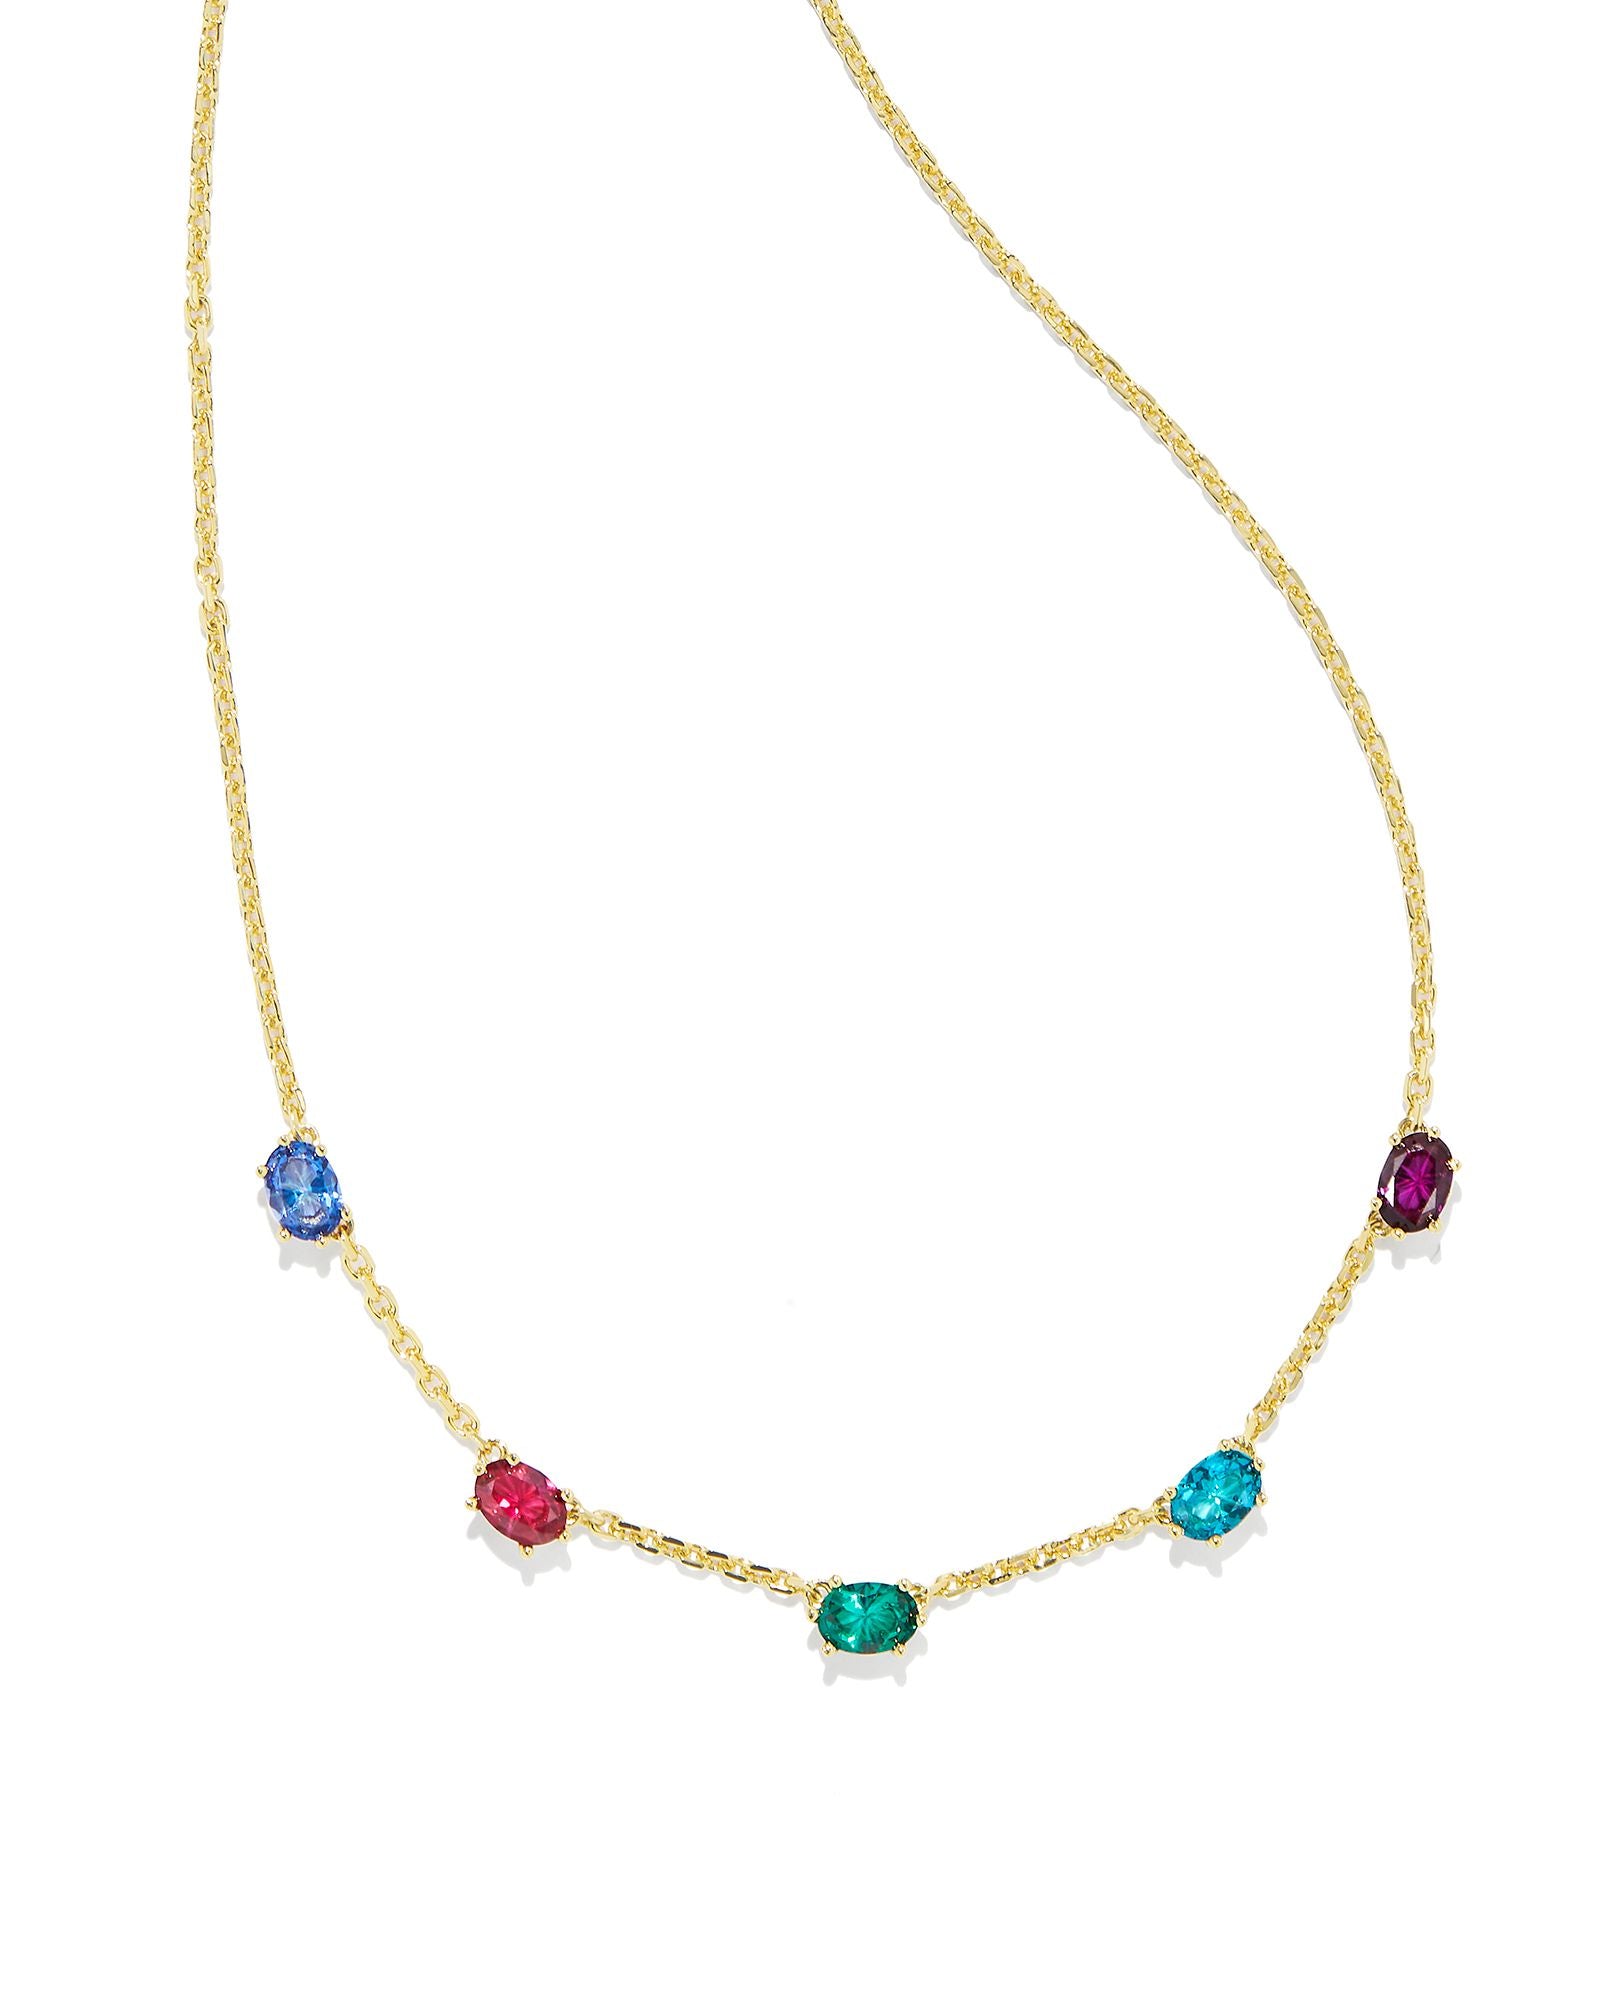 Cailin Gold Crystal Strand Necklace in Multi Mix - Brazos Avenue Market 